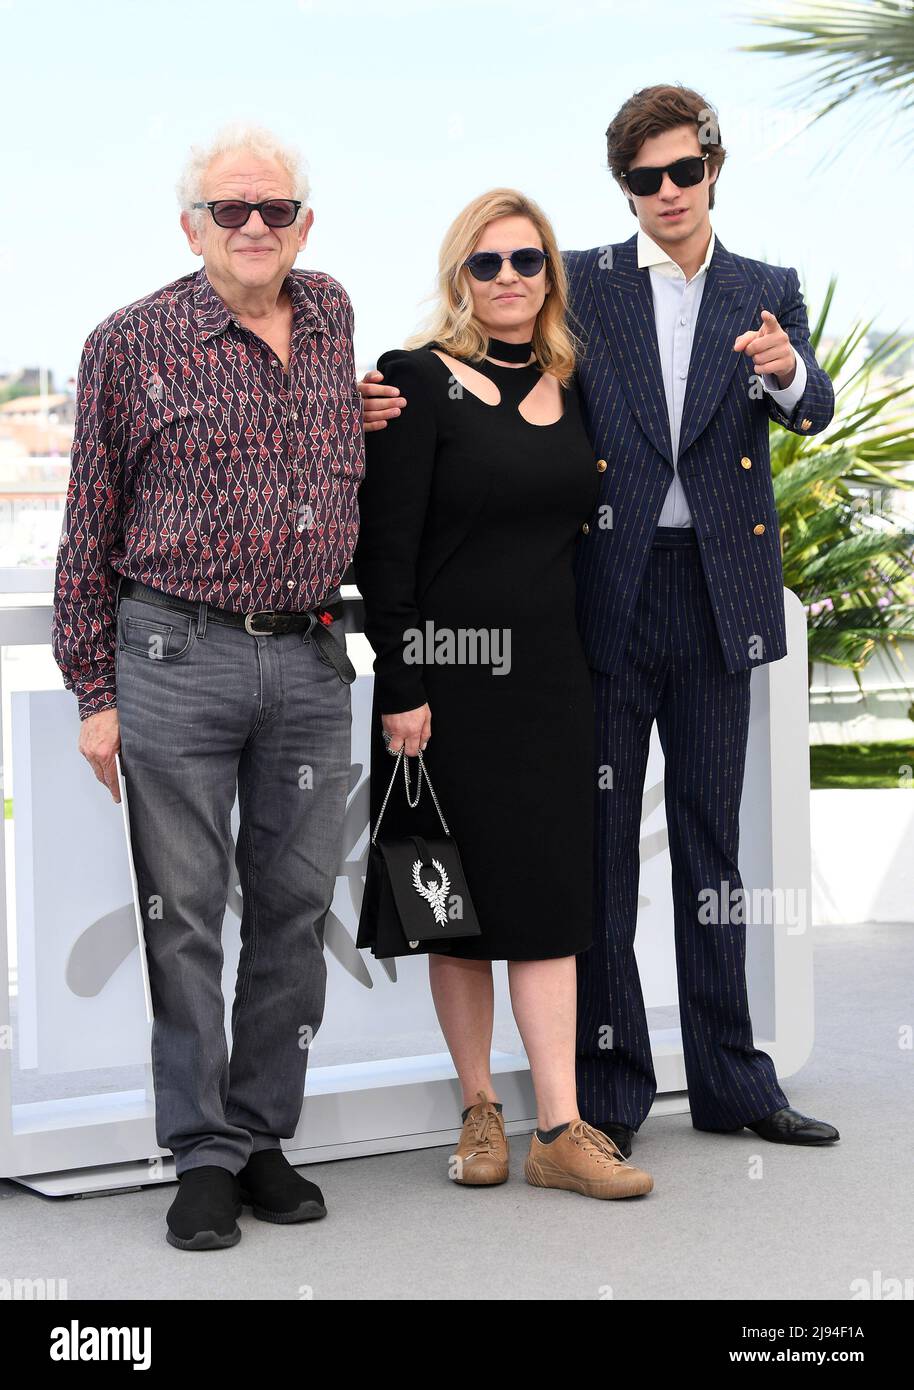 Cannes, France. 20th May, 2022. British producer Jeremy Thomas, Polish producer Ewa Piaskowska and Italian actor Lorenzo Zurzolo attend the photo call for EO at Palais des Festivals at the 75th Cannes Film Festival, France on Friday, May 20, 2022. Photo by Rune Hellestad/ Credit: UPI/Alamy Live News Stock Photo